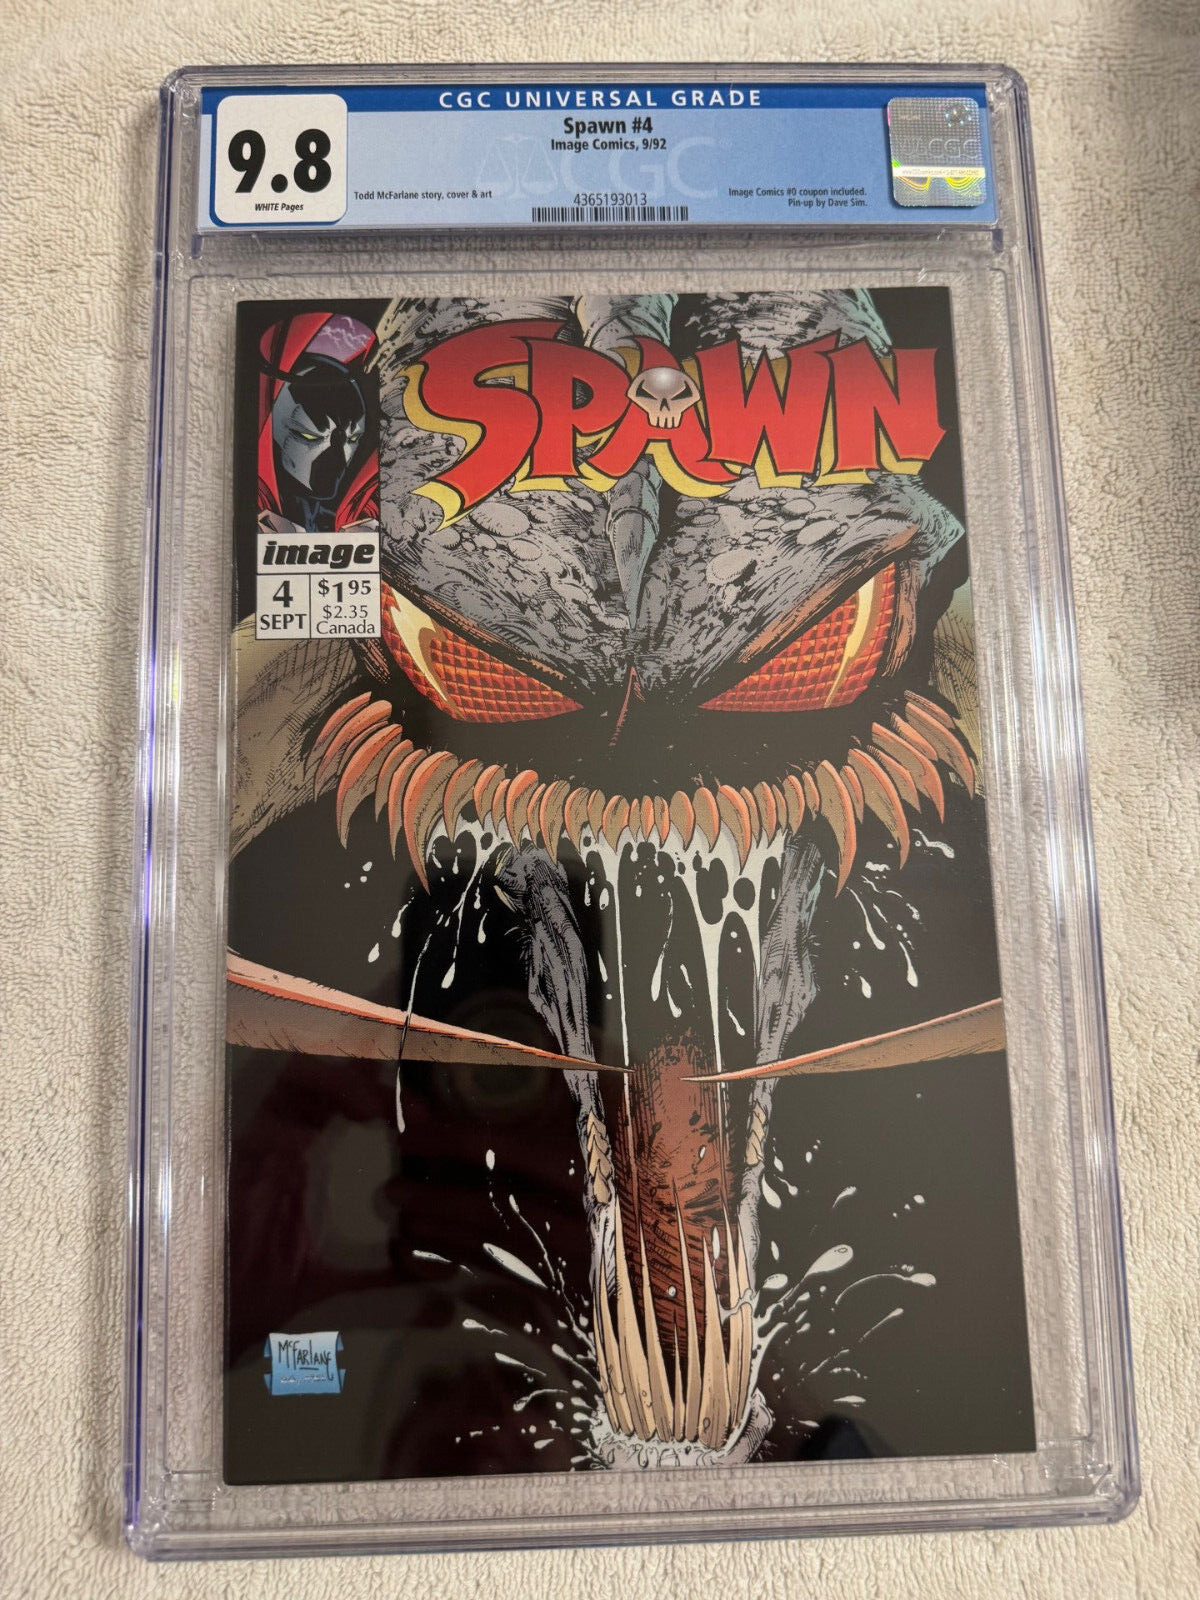 Spawn #4 - CGC 9.8 - White Pages - Image 1992